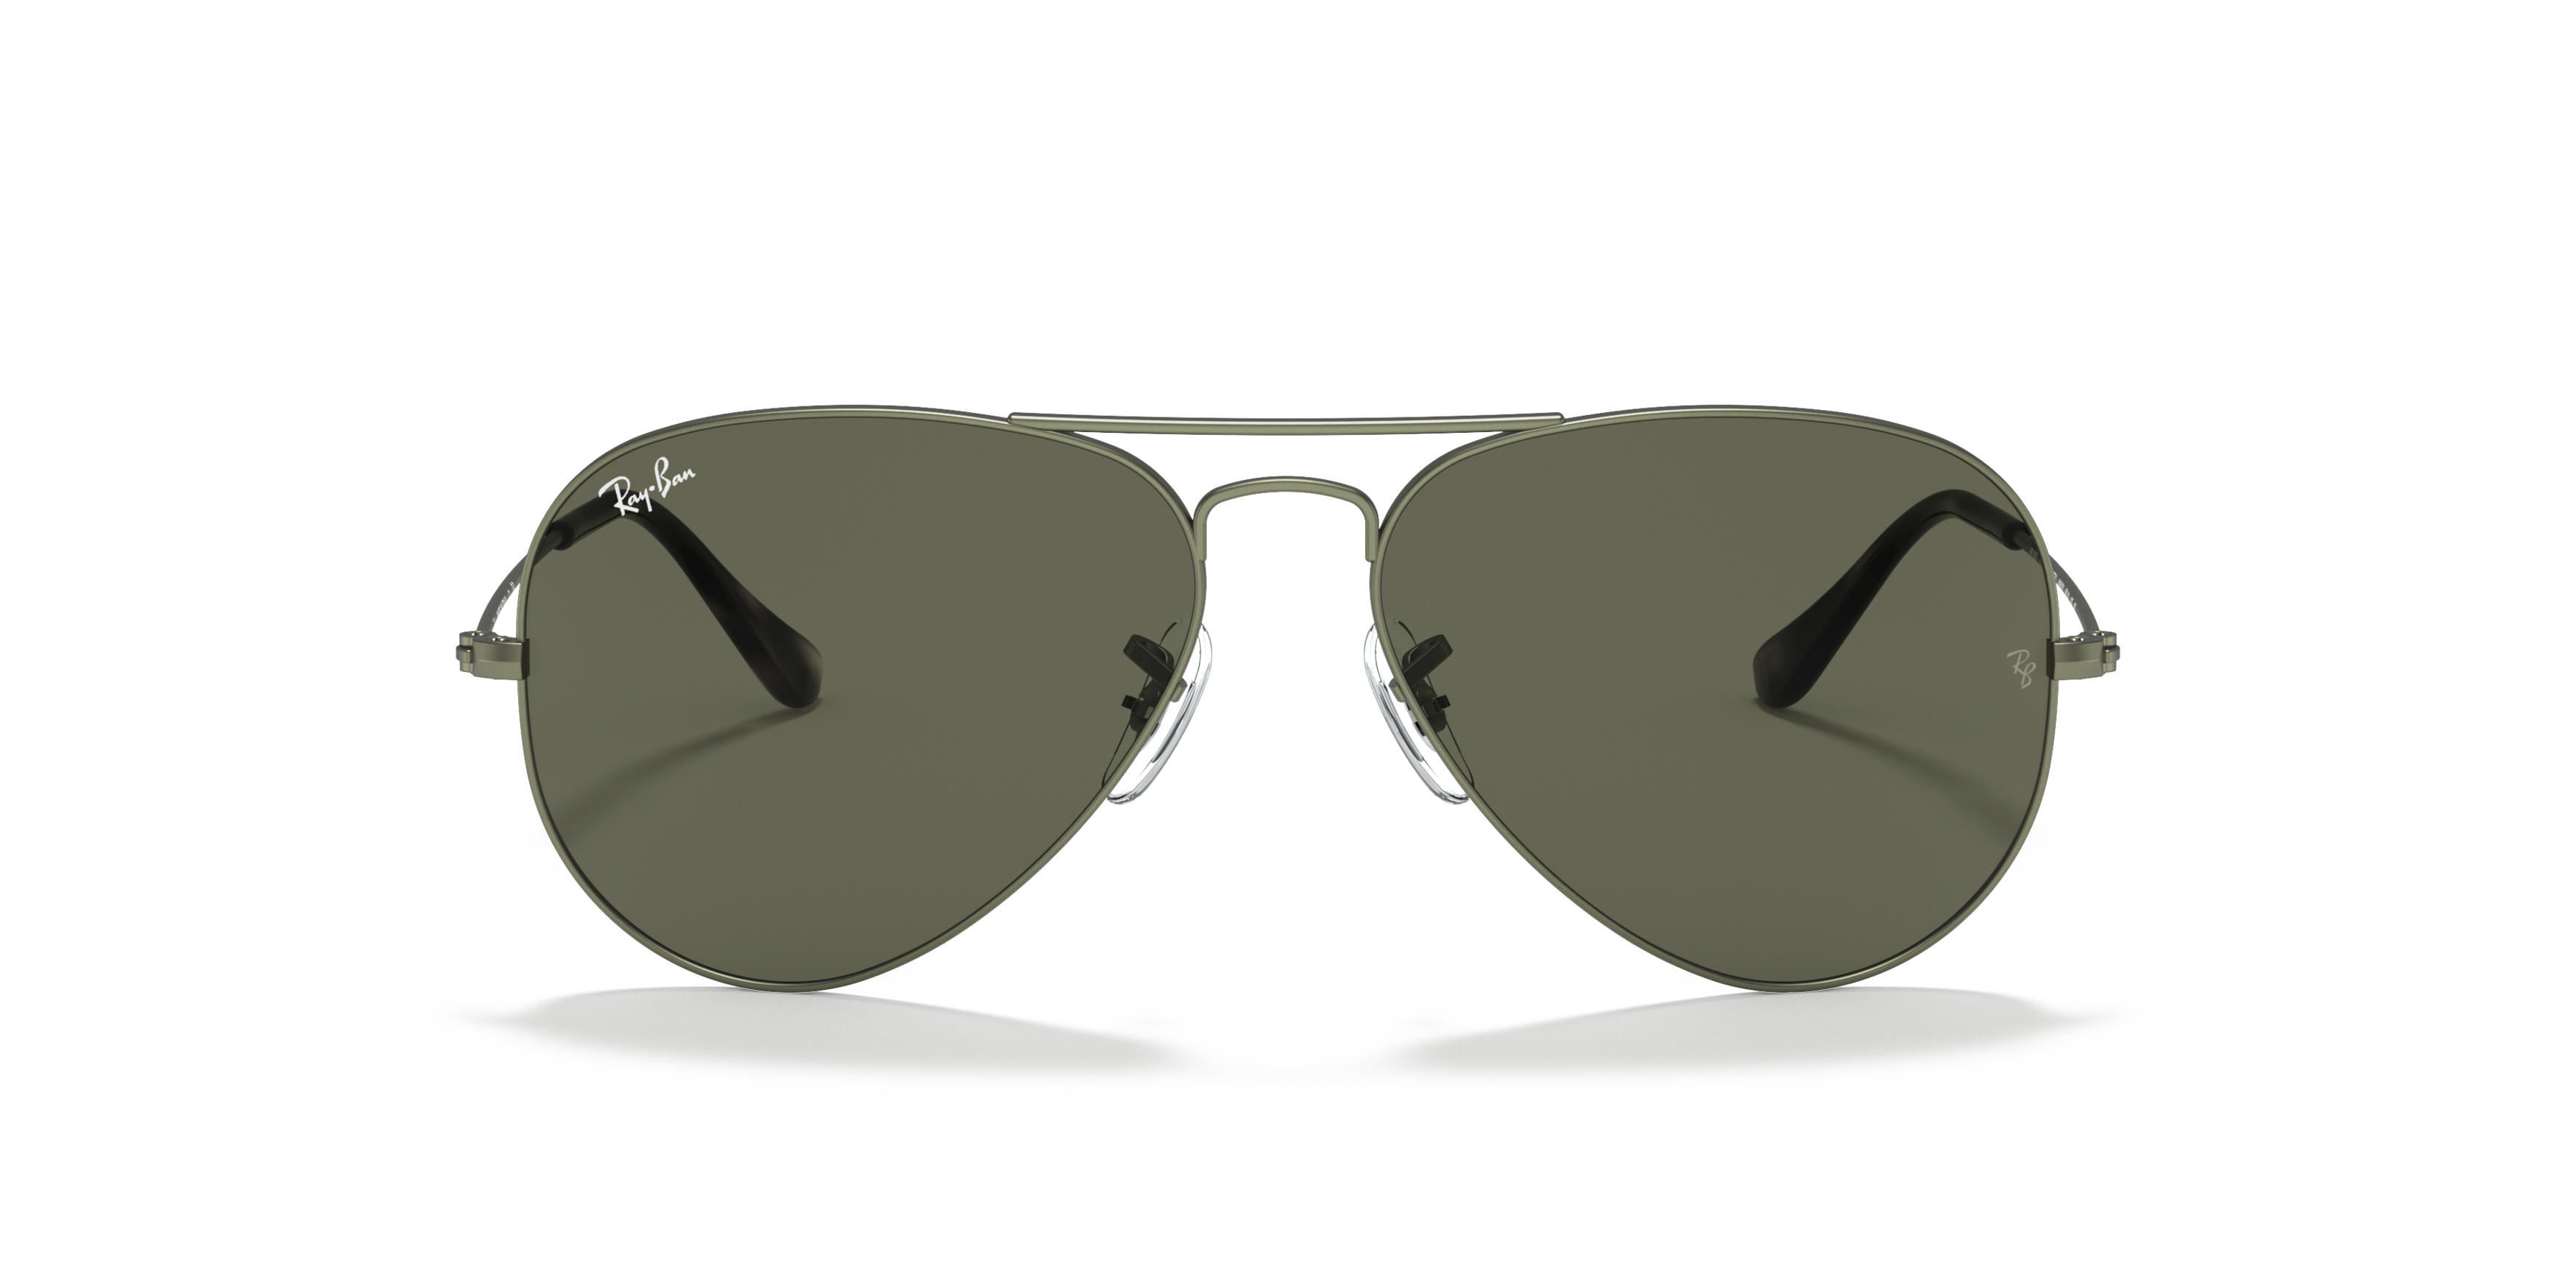 [products.image.front] Ray-Ban Aviator Classic RB3025 919131